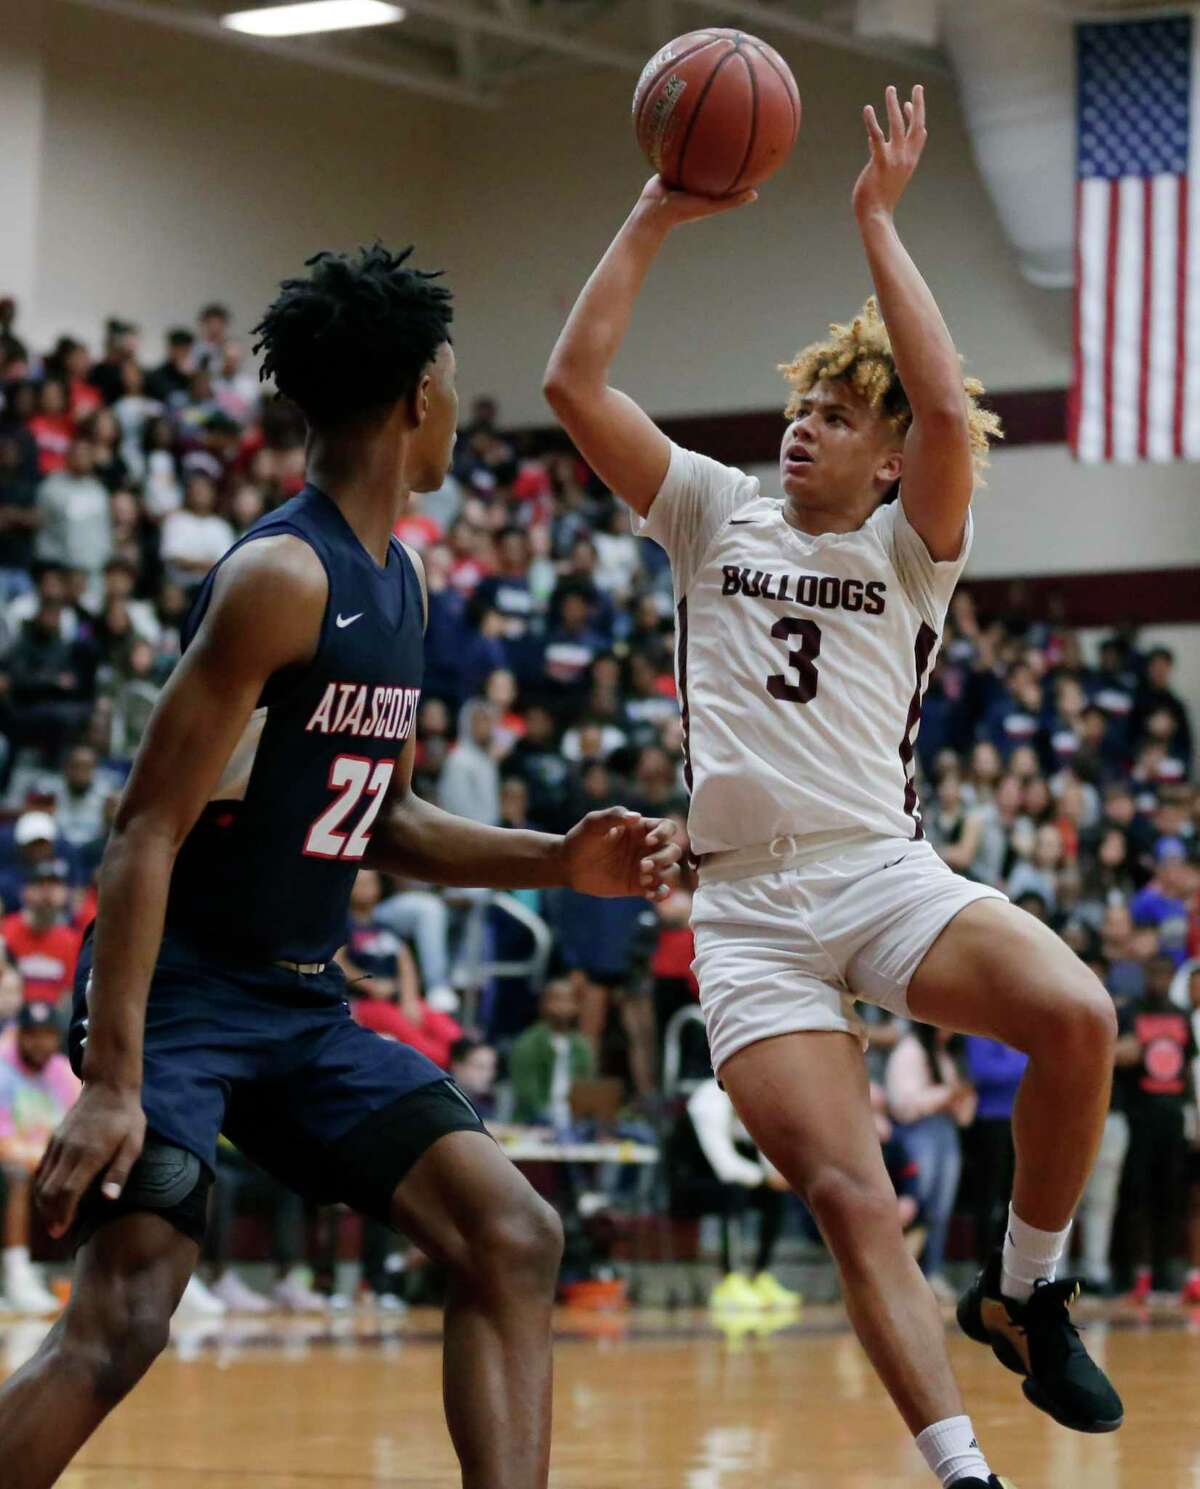 Summer Creek JaVon Jackson (3) puts up a shot over Atascocita guard Cameron Morrison (22) during the second half of a high school basketball game Tuesday, Feb. 4, 2020 in Houston, TX.